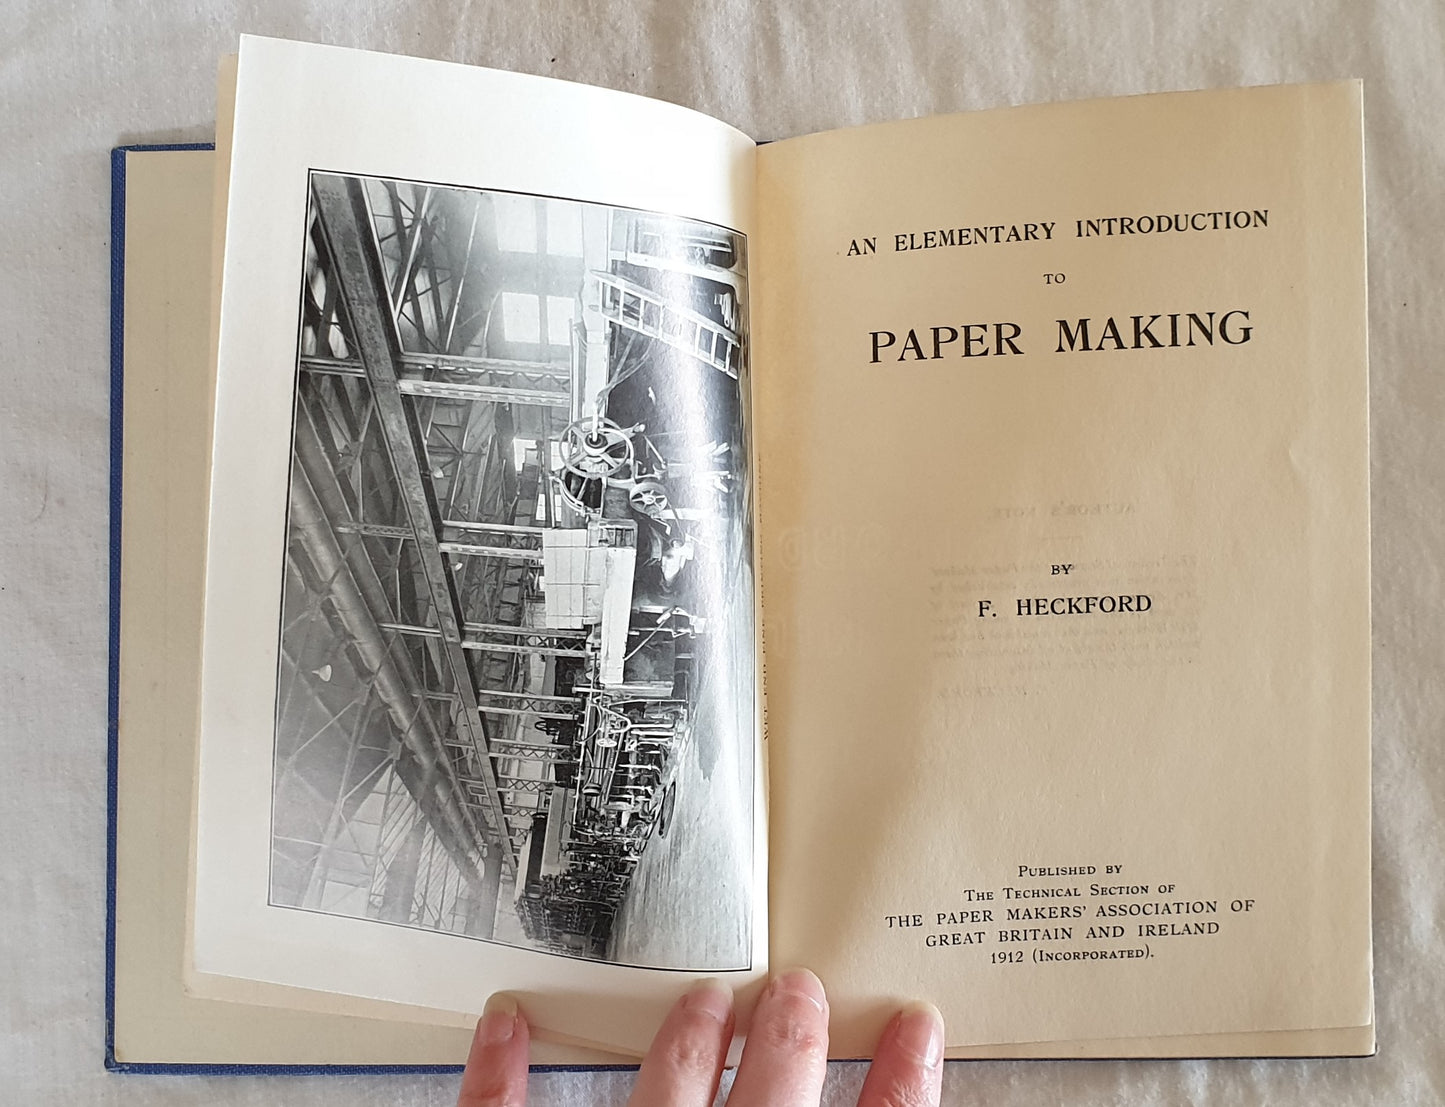 An Elementary Introduction to Paper Making by F. Heckford